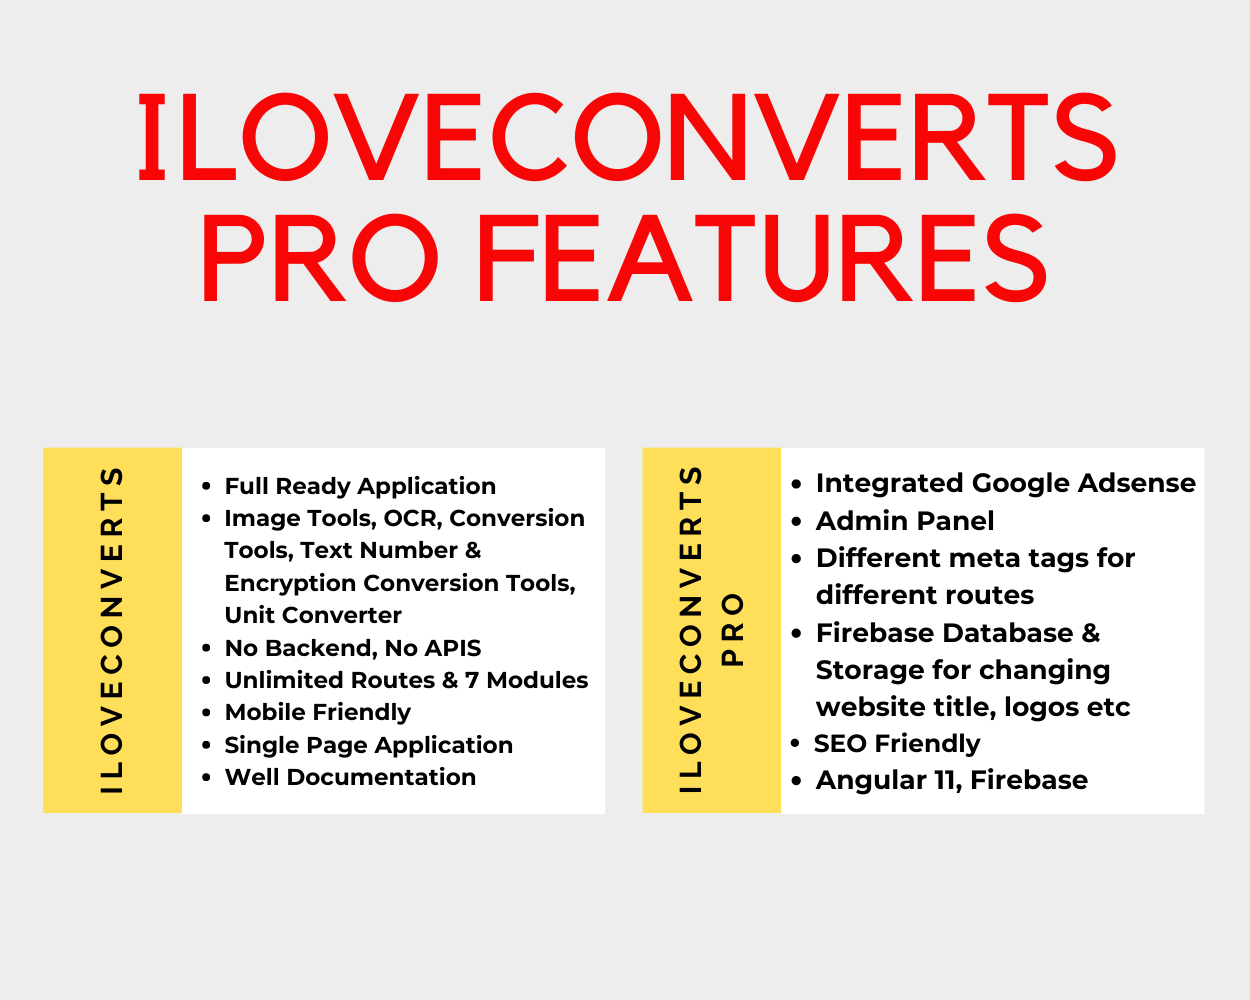 [All in One] iLoveConverts PRO - Online Converter Tools Full Production Ready App with Admin Panel - 2